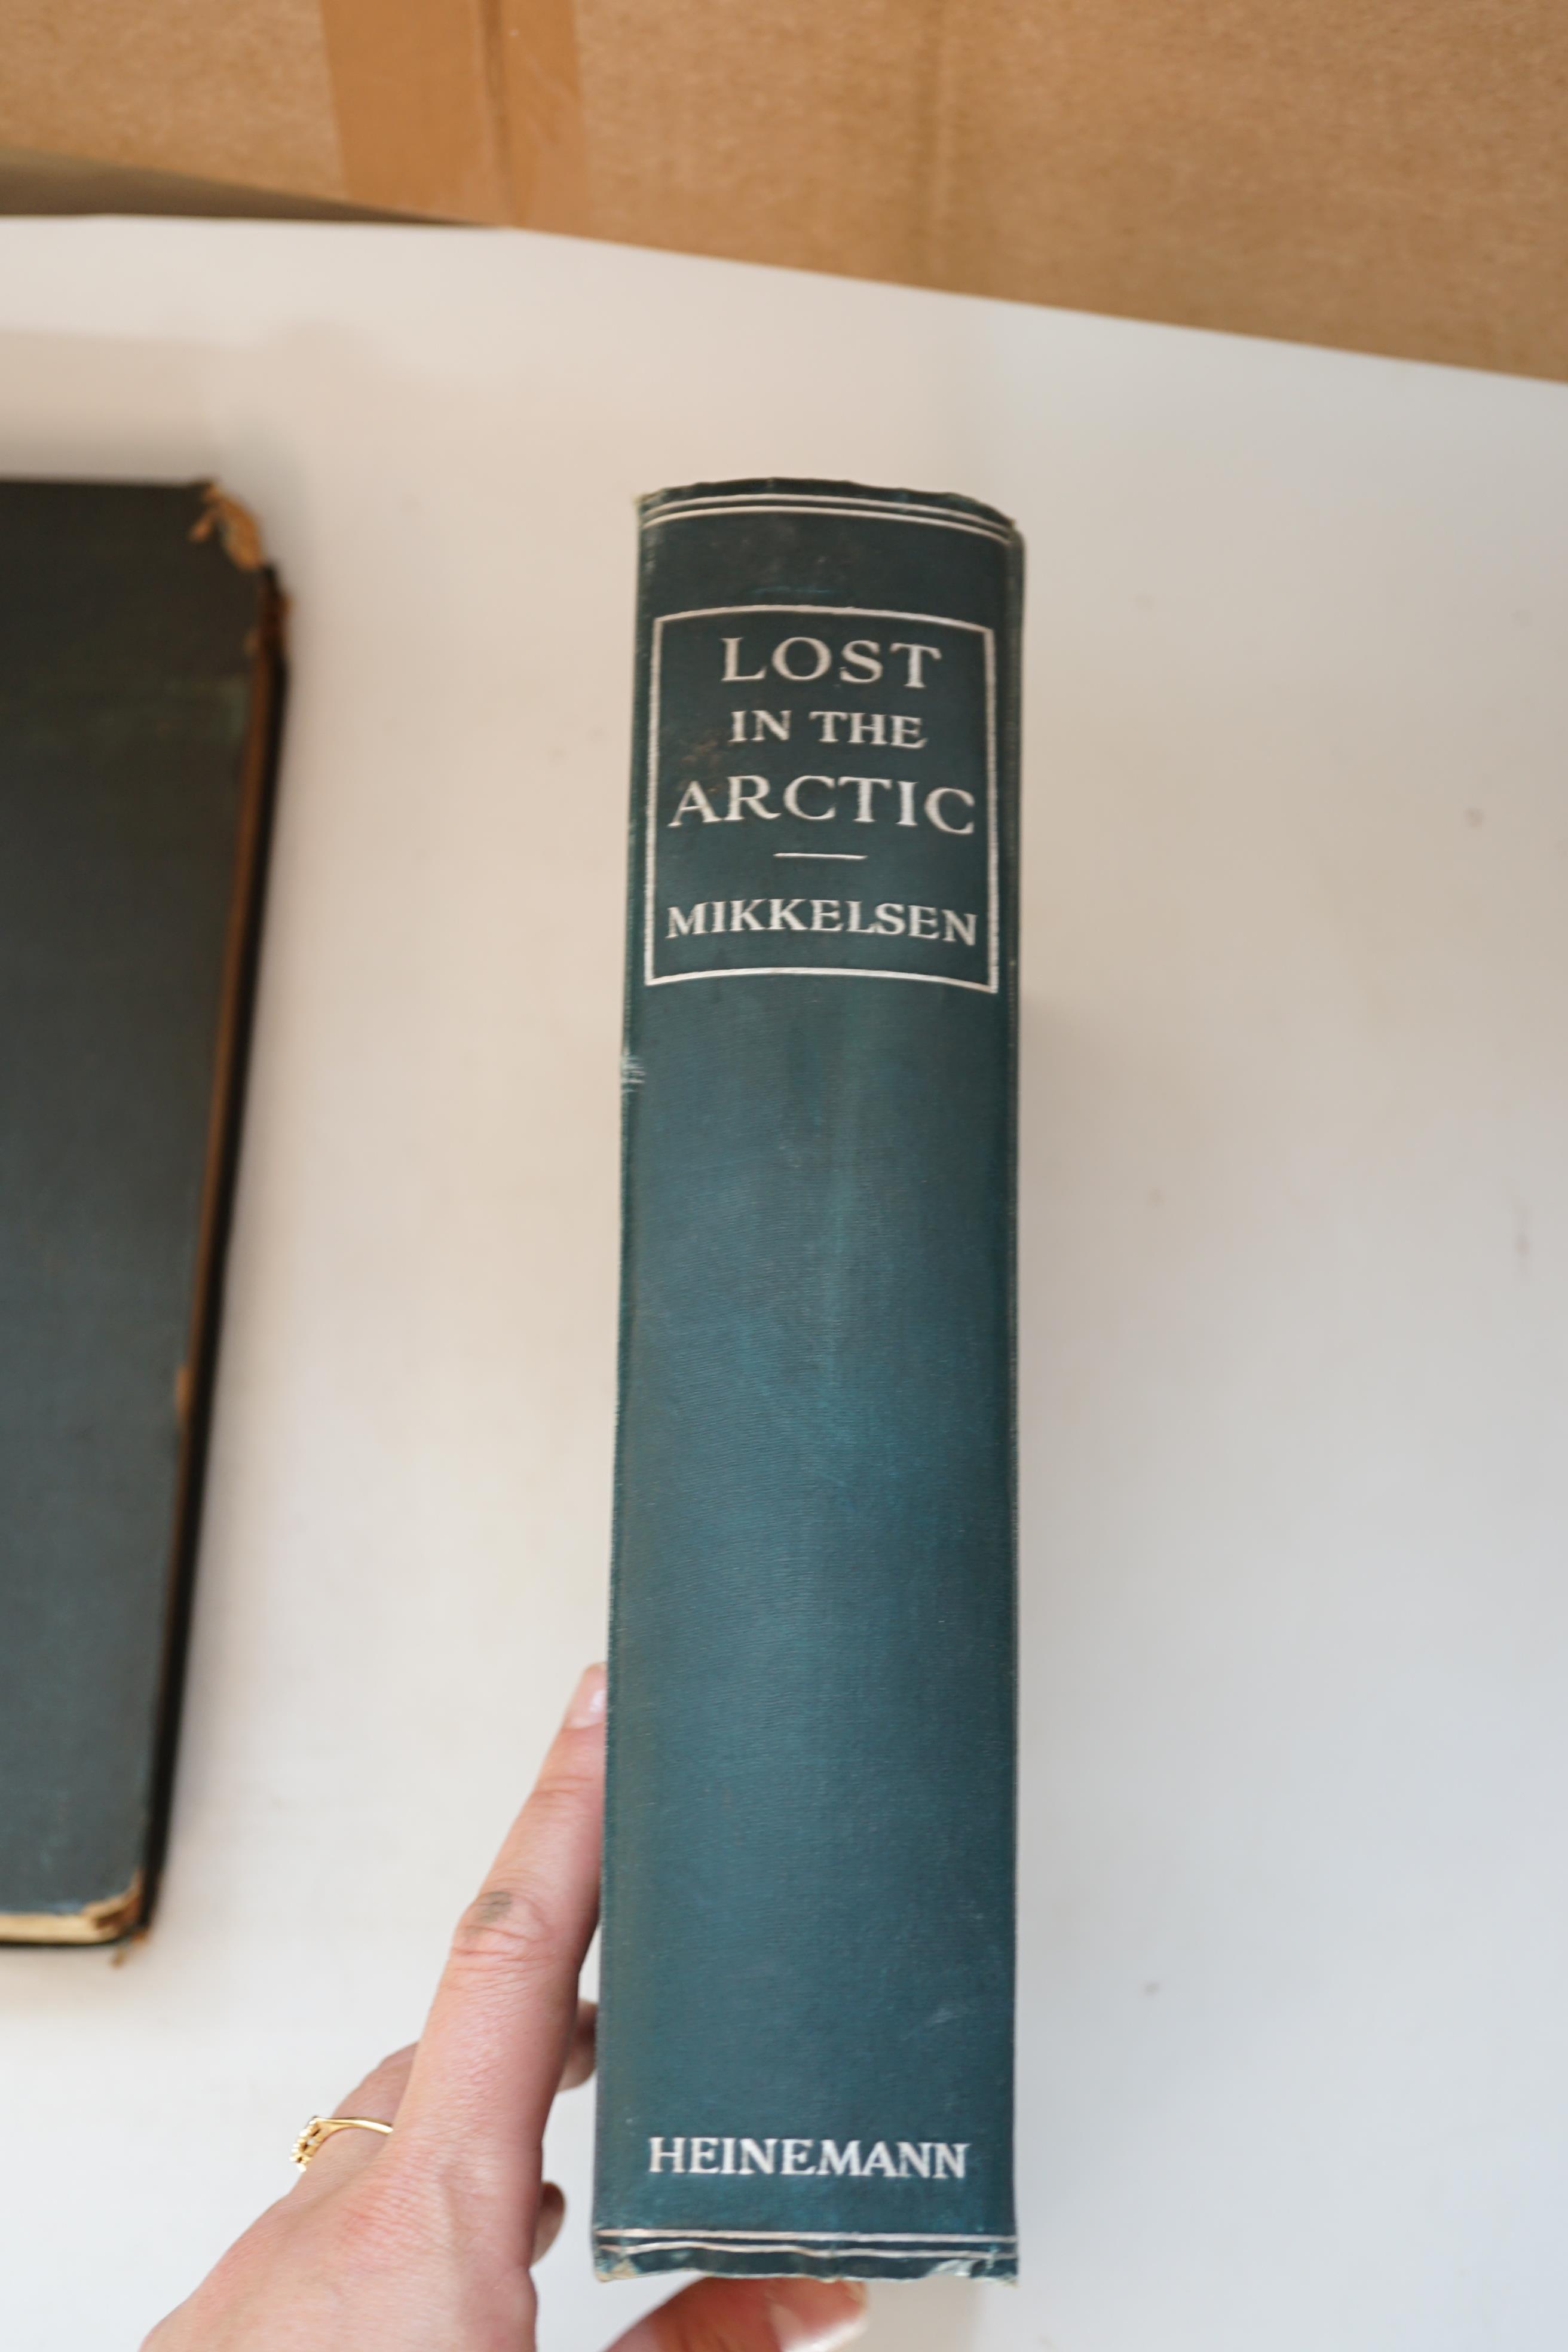 Mikkelsen, Ejnar. Lost in the Arctic being the Story of the 'Alabama' Expedition, 1909-1912, 1st edition, illustrated, including folding map at rear, 4to, cloth, pictorial decorated in silver with a panel depicting an ic